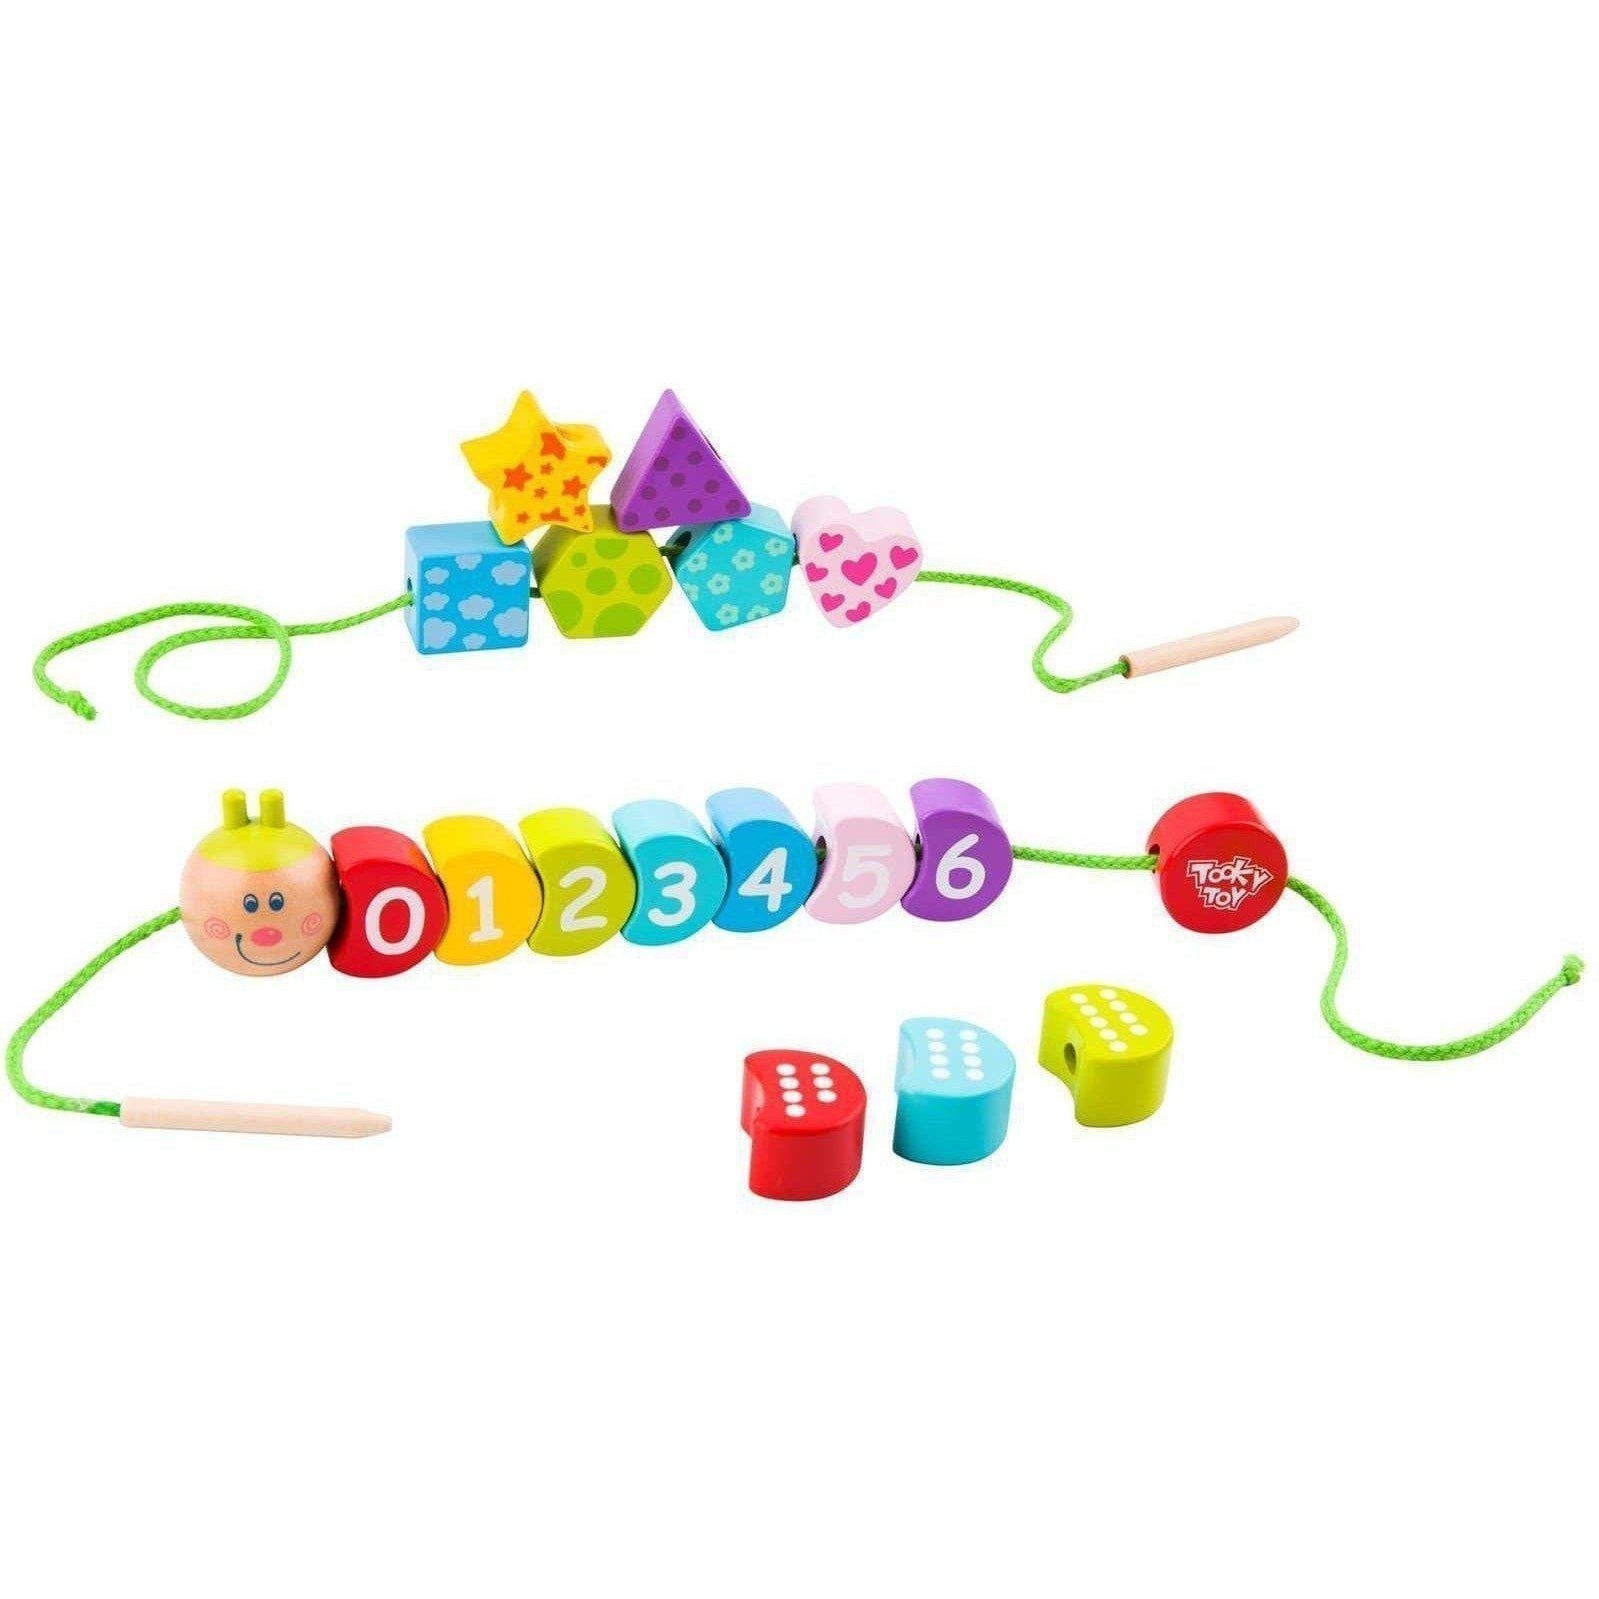 Caterpillar Lacing Toy Number and Shapes 